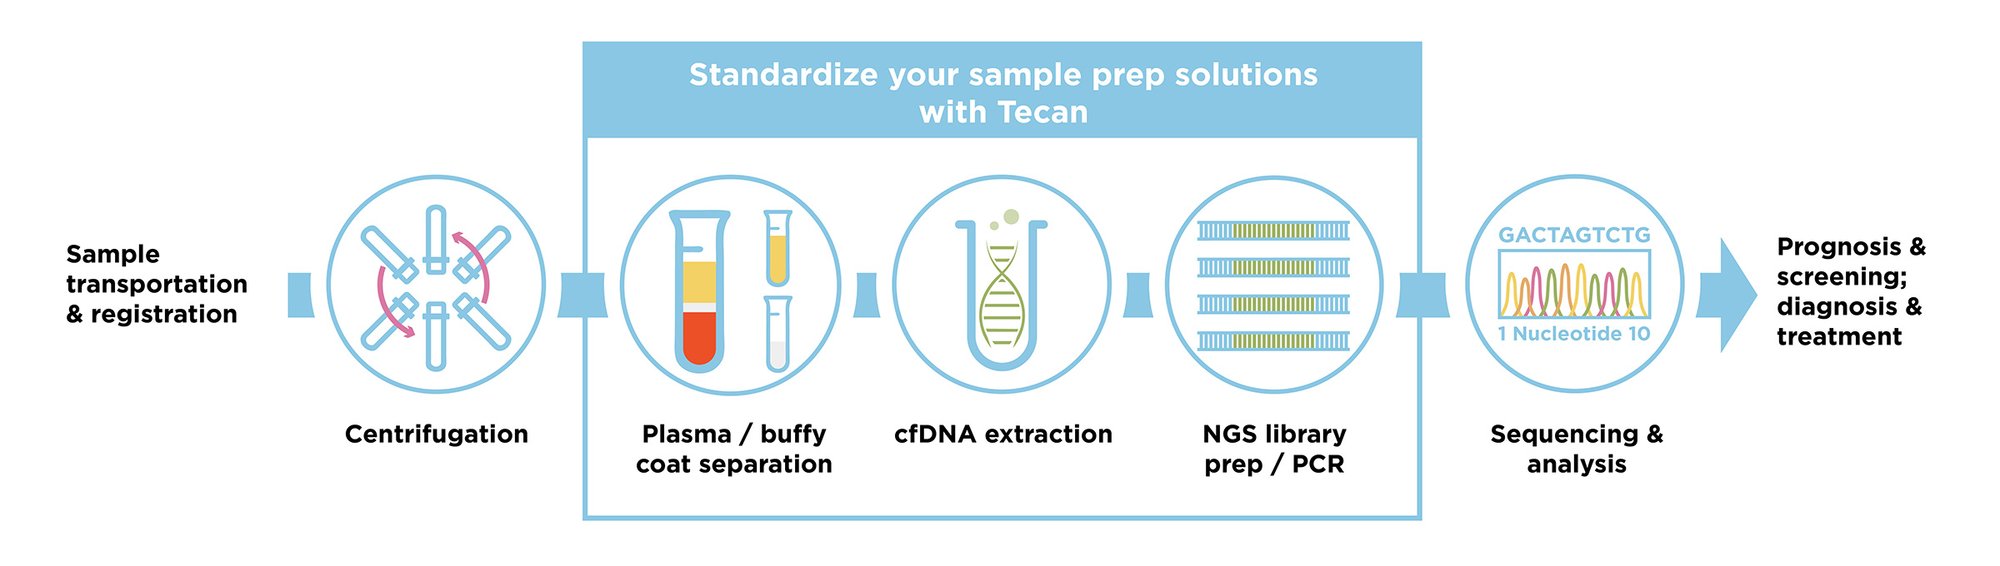 automated sample preparation for NGS analysis